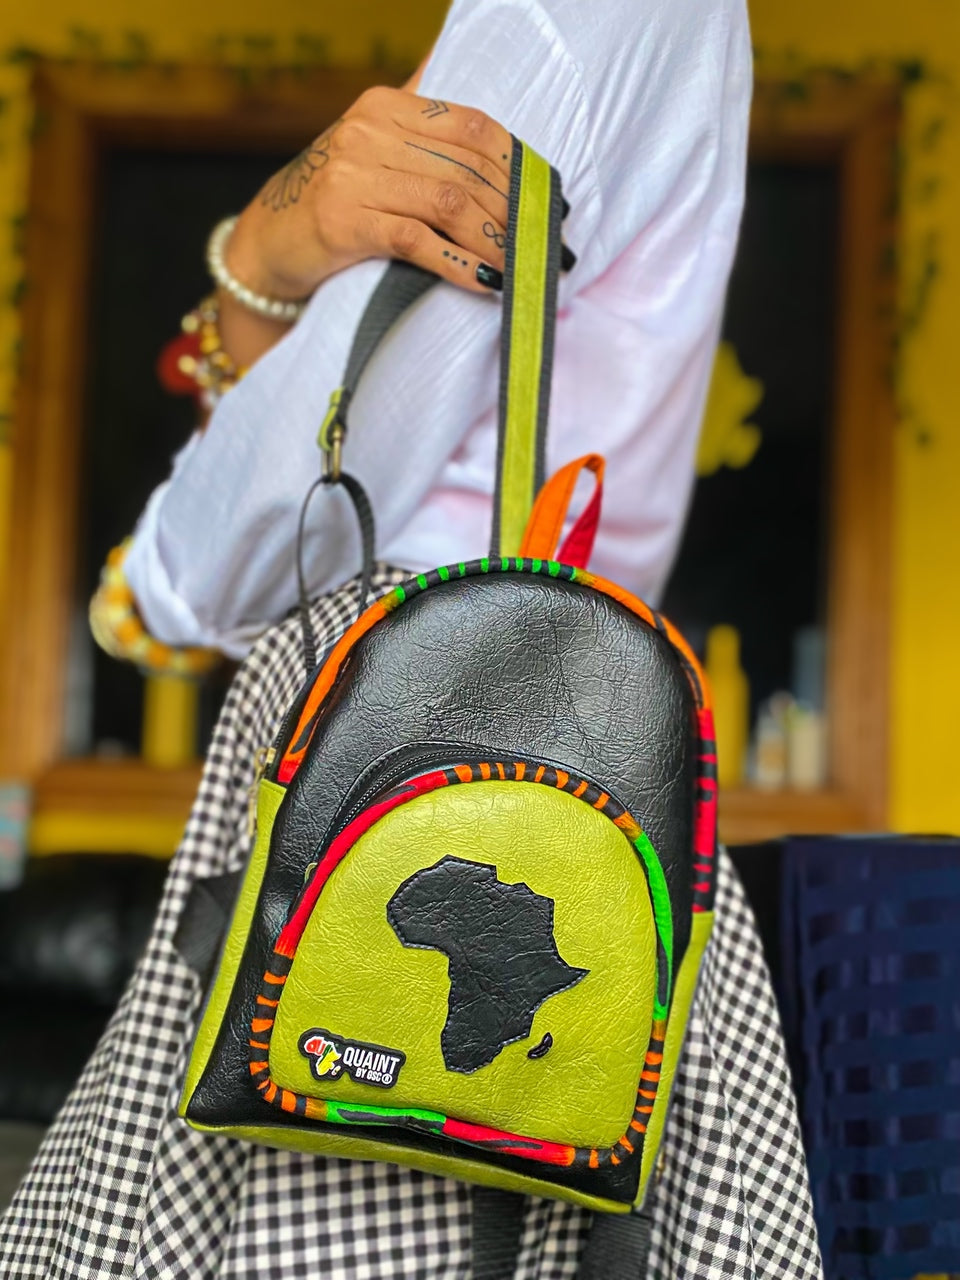 Bitesize Backpack. Cute black and chatreuse green backpack with a map of Africa on the front.